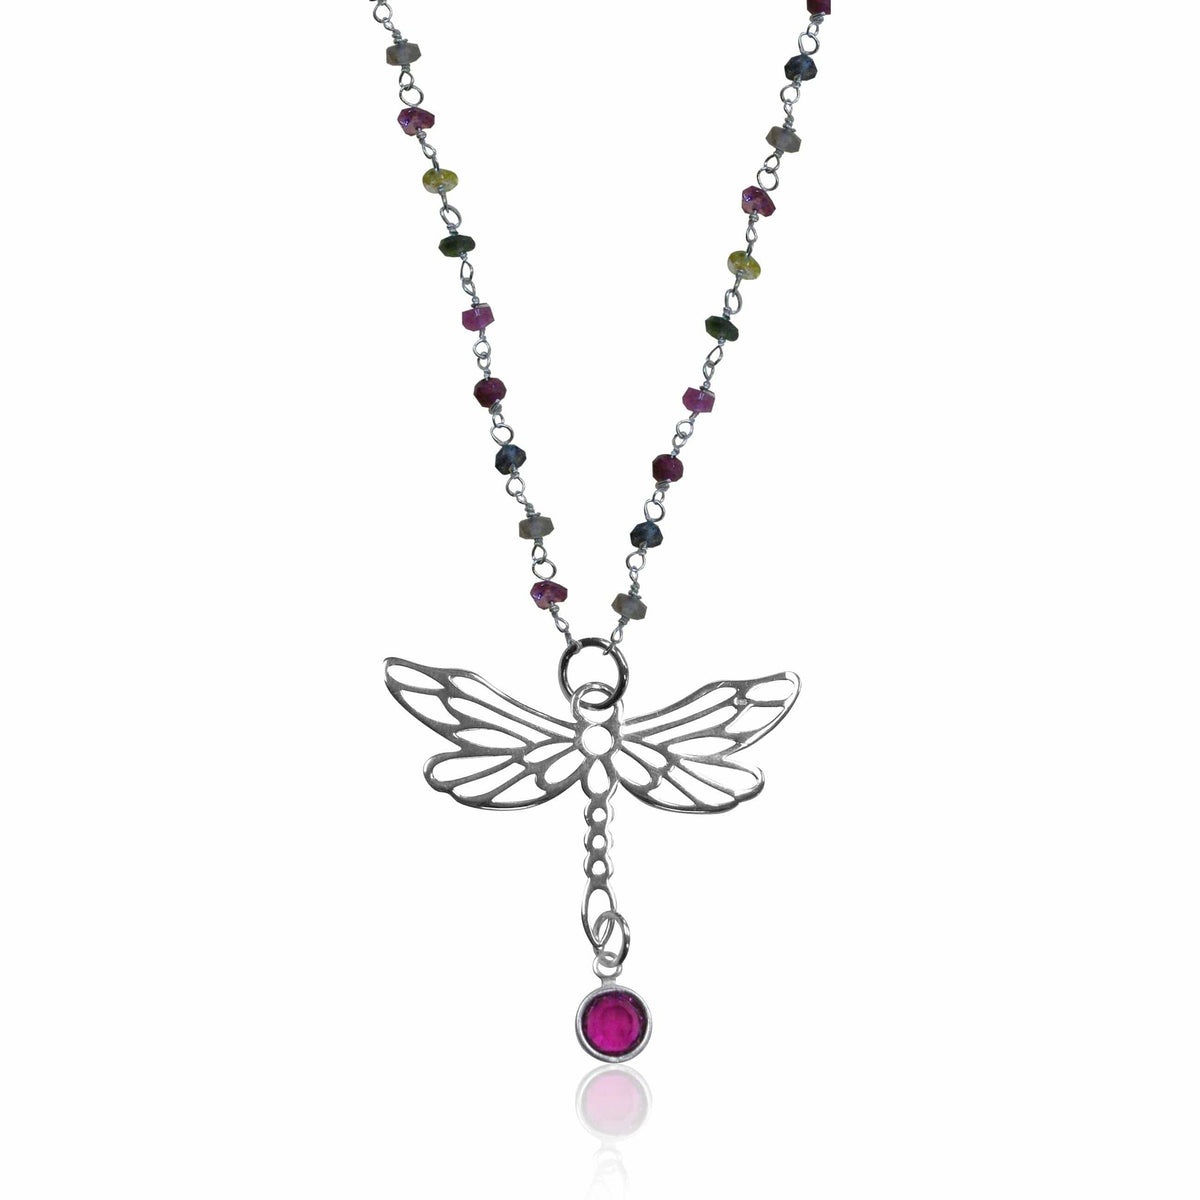 Silver Wire Wrapped Rainbow Tourmaline Necklace with a Dragonfly for Change in Your Life.